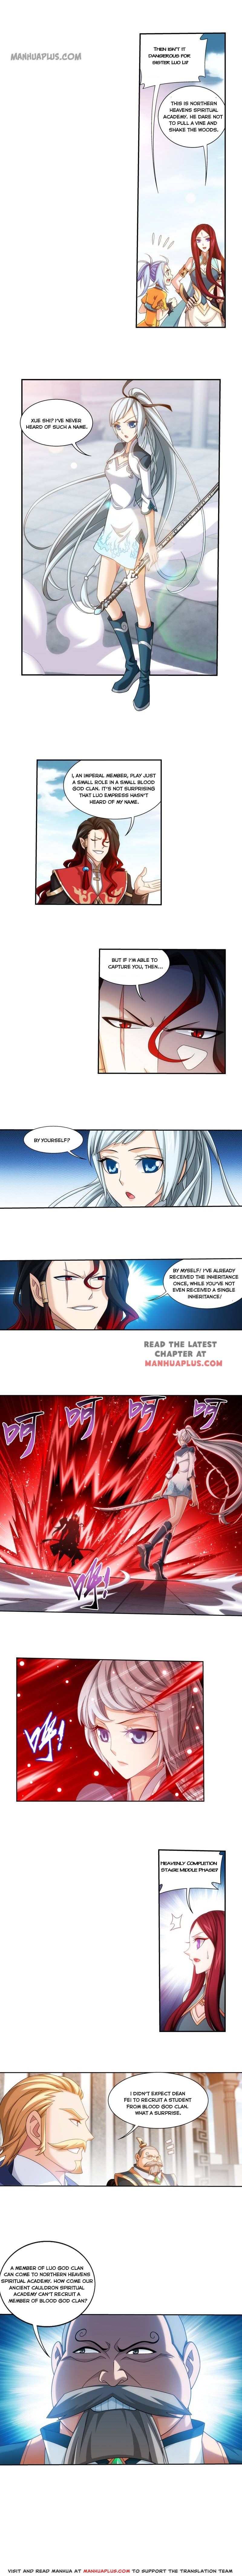 The Great Ruler Chap 182